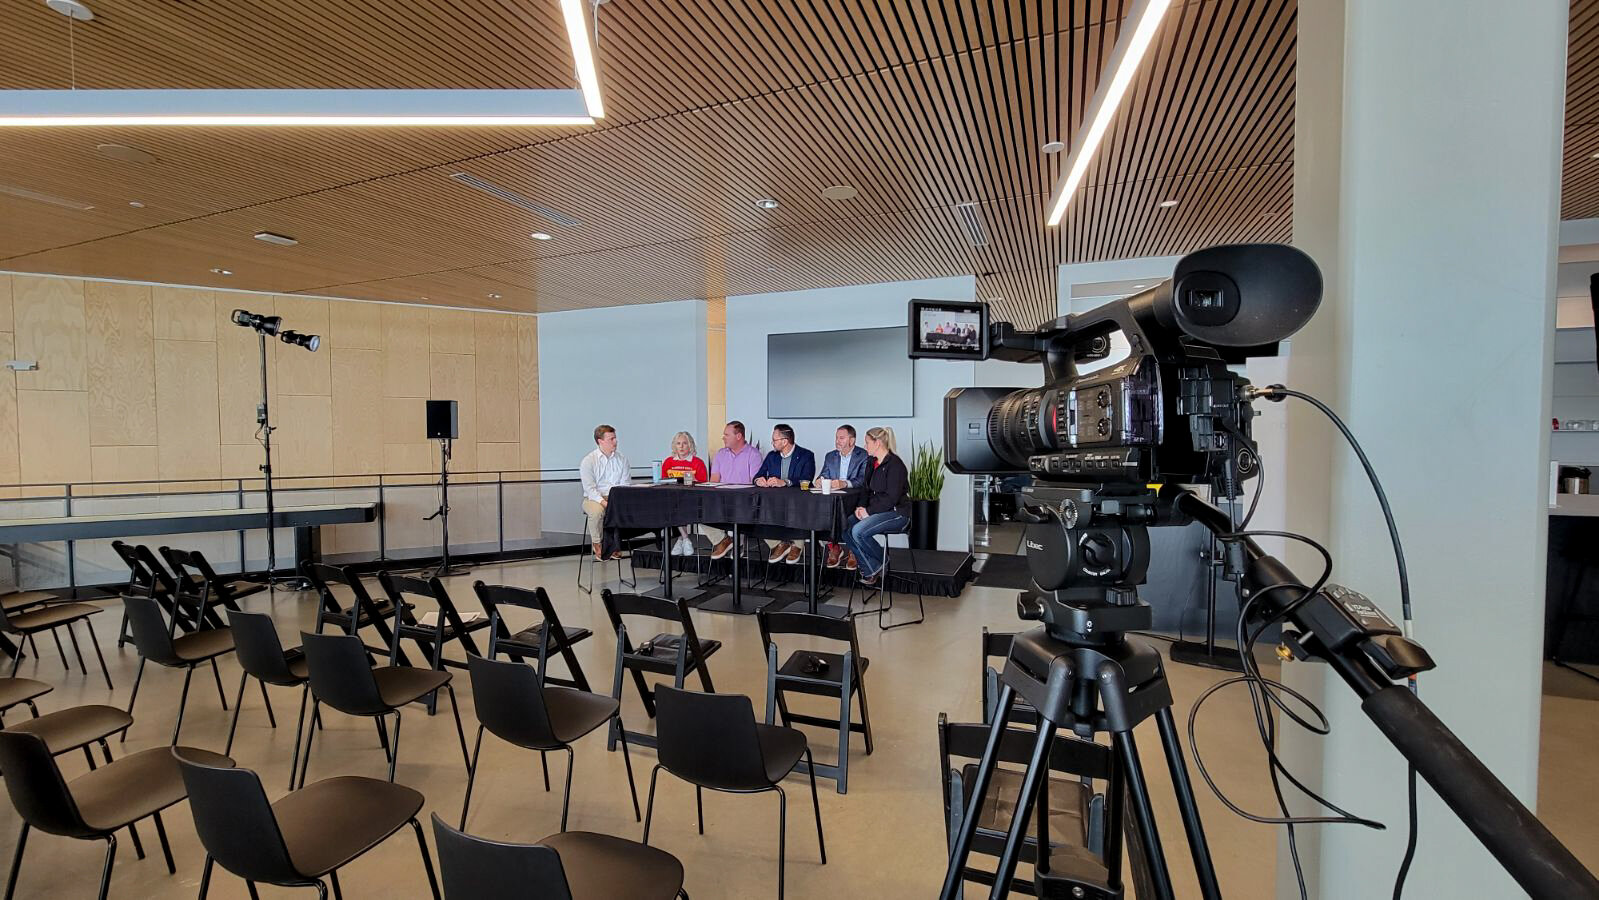 Elevate your all company meetings with professional live stream services!  Our team is in downtown KC today, providing live stream support for McCownGordon's quarterly all company meeting. Live stream services are a great way to provide a professiona